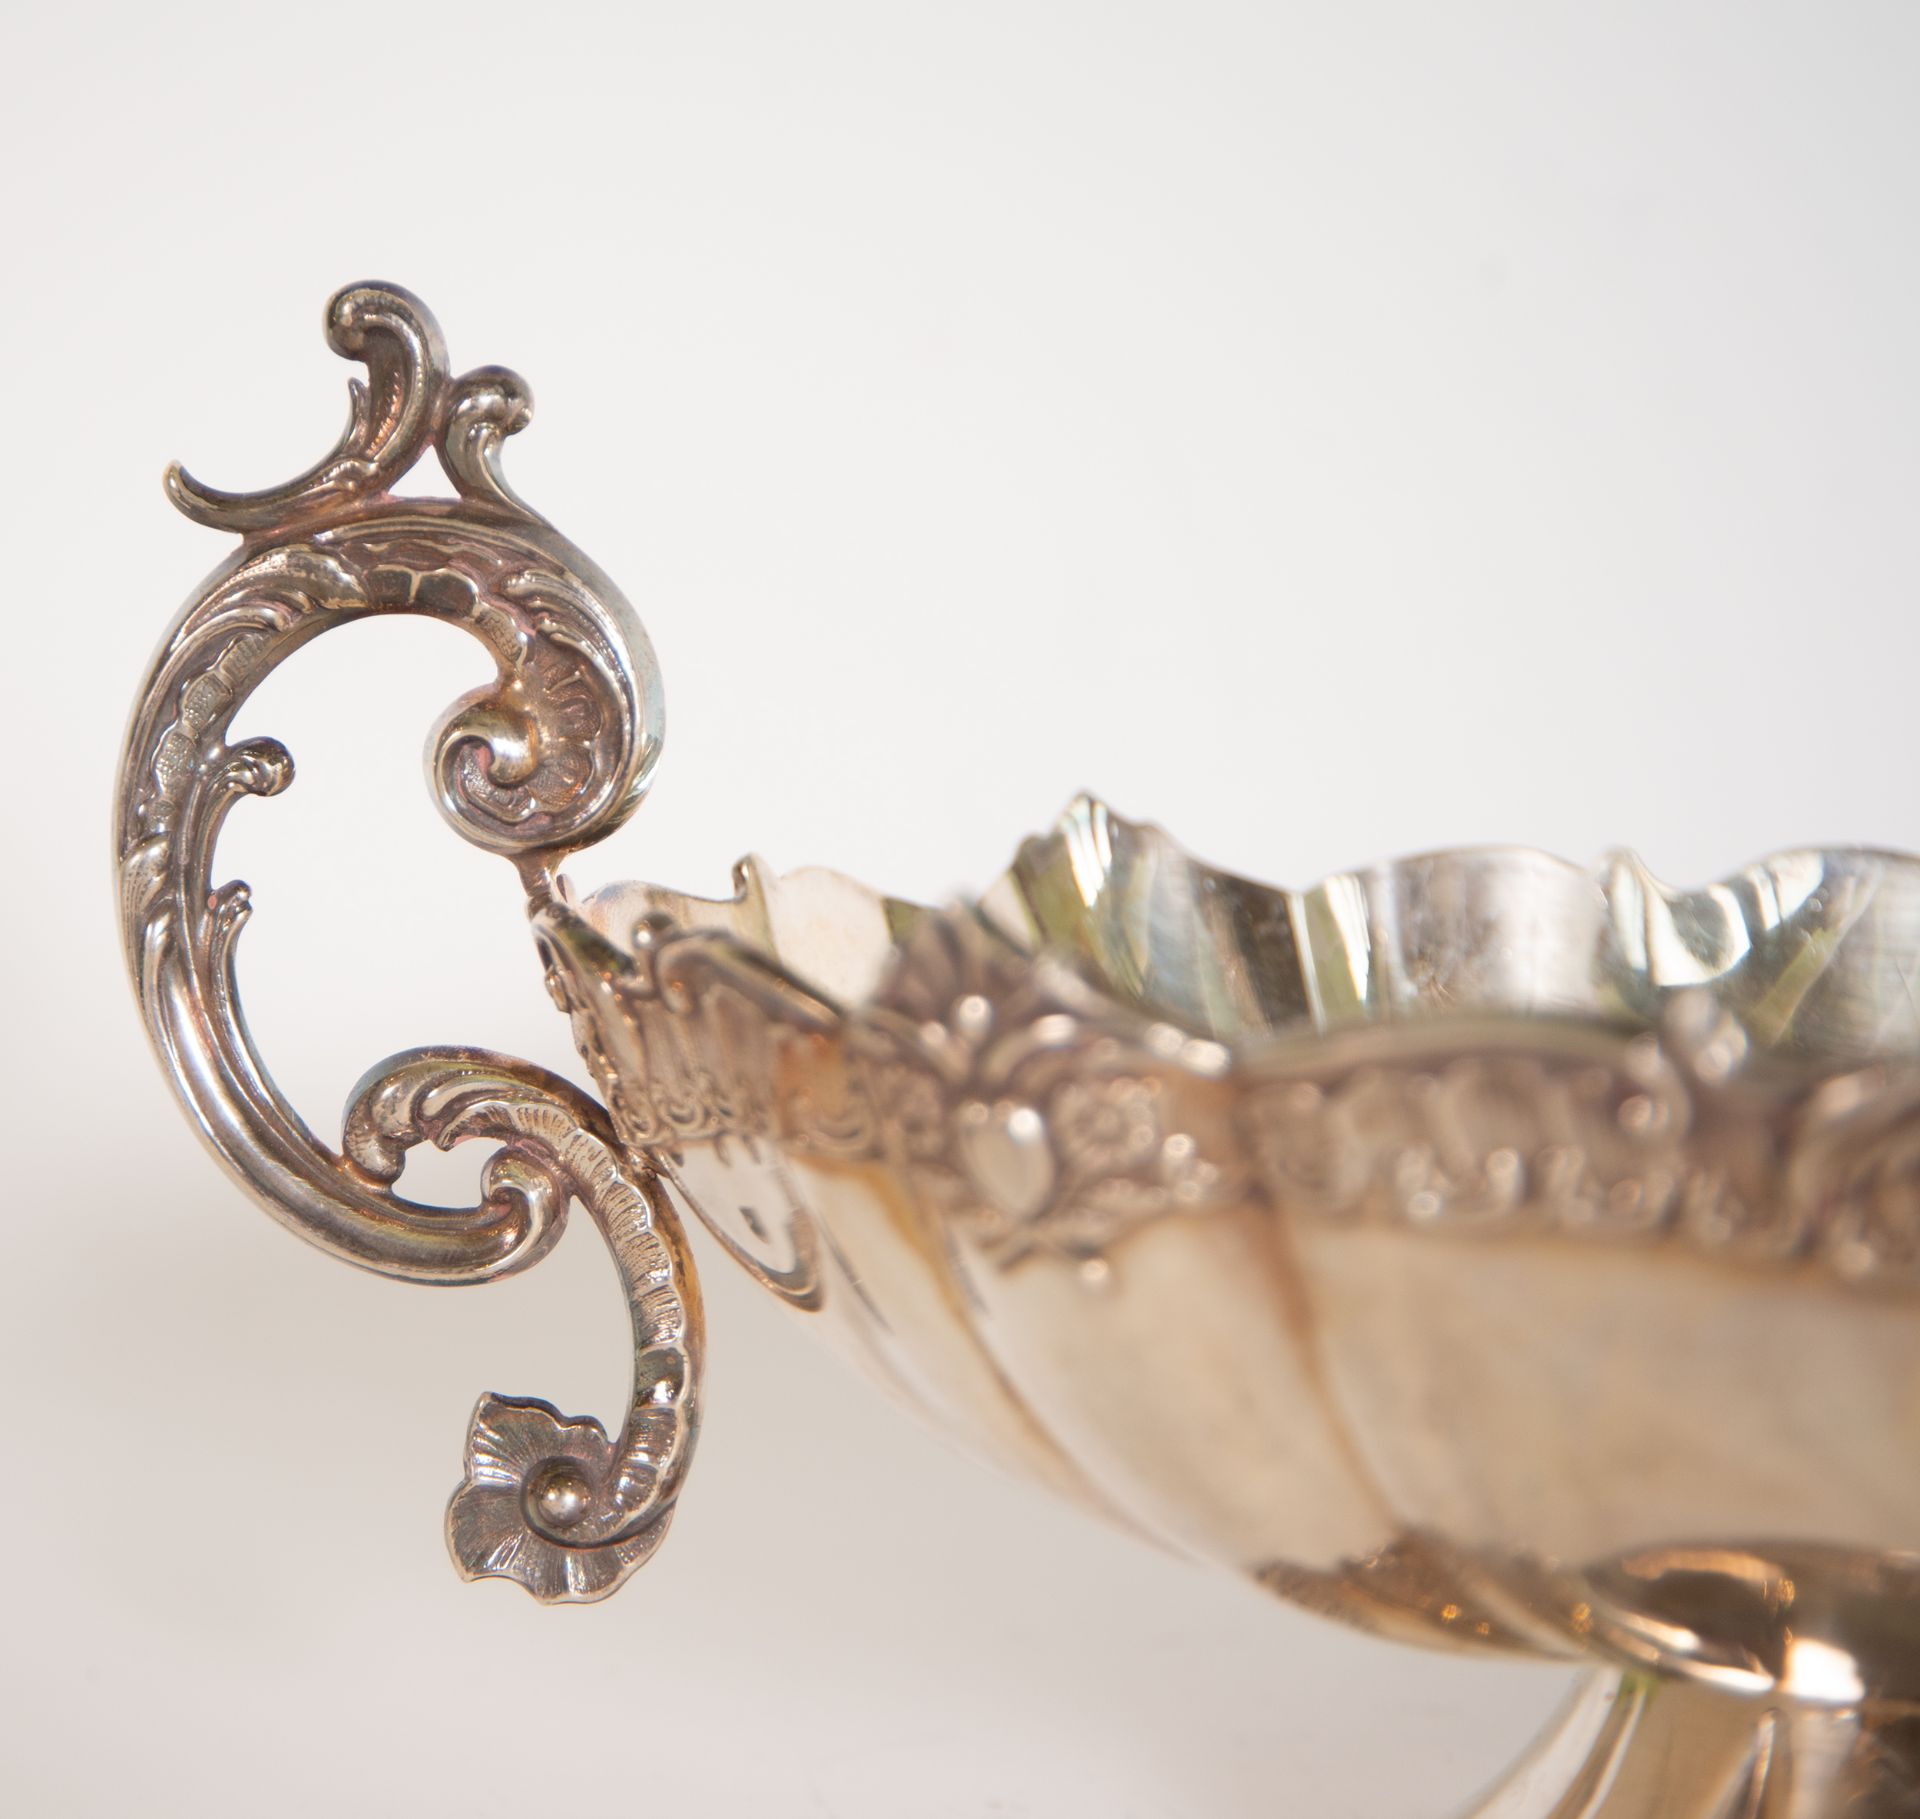 Important fruit bowl in solid sterling silver, French school of the 19th century - Image 2 of 5